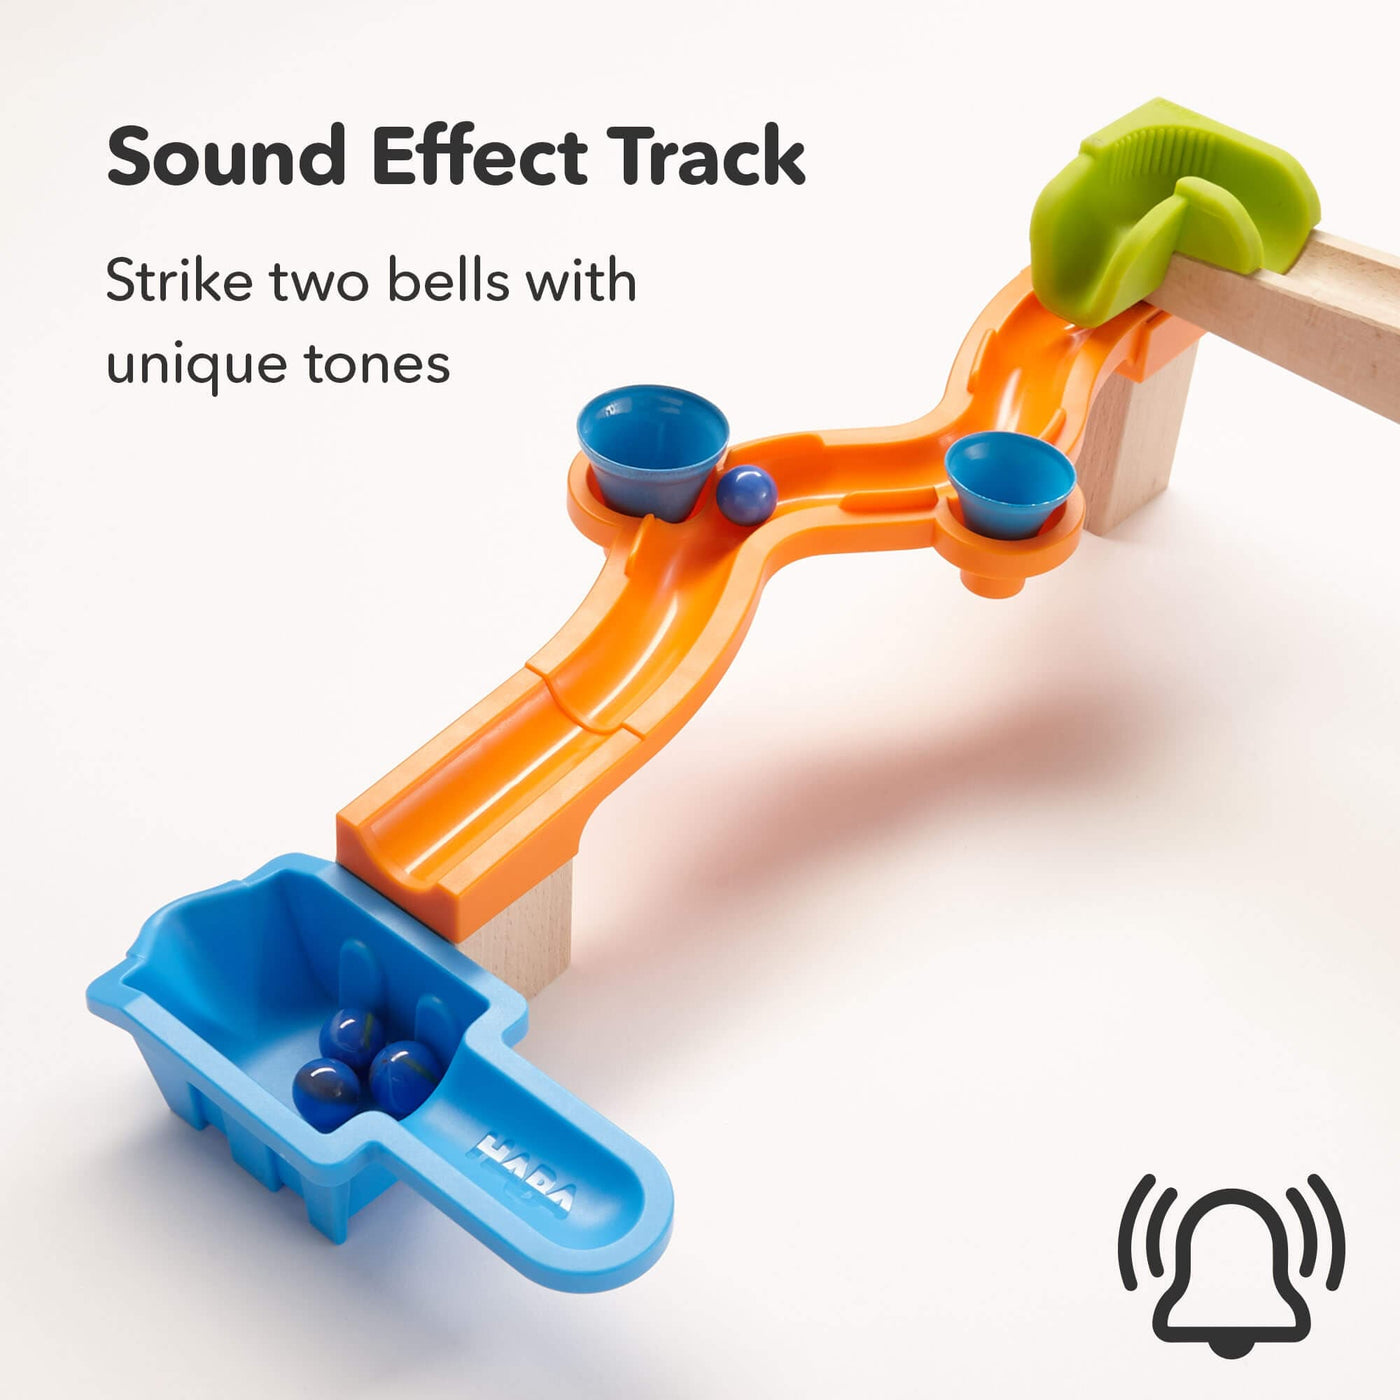 Marble Run Master Construction Set - sound effect track - strike two bells with unique tones